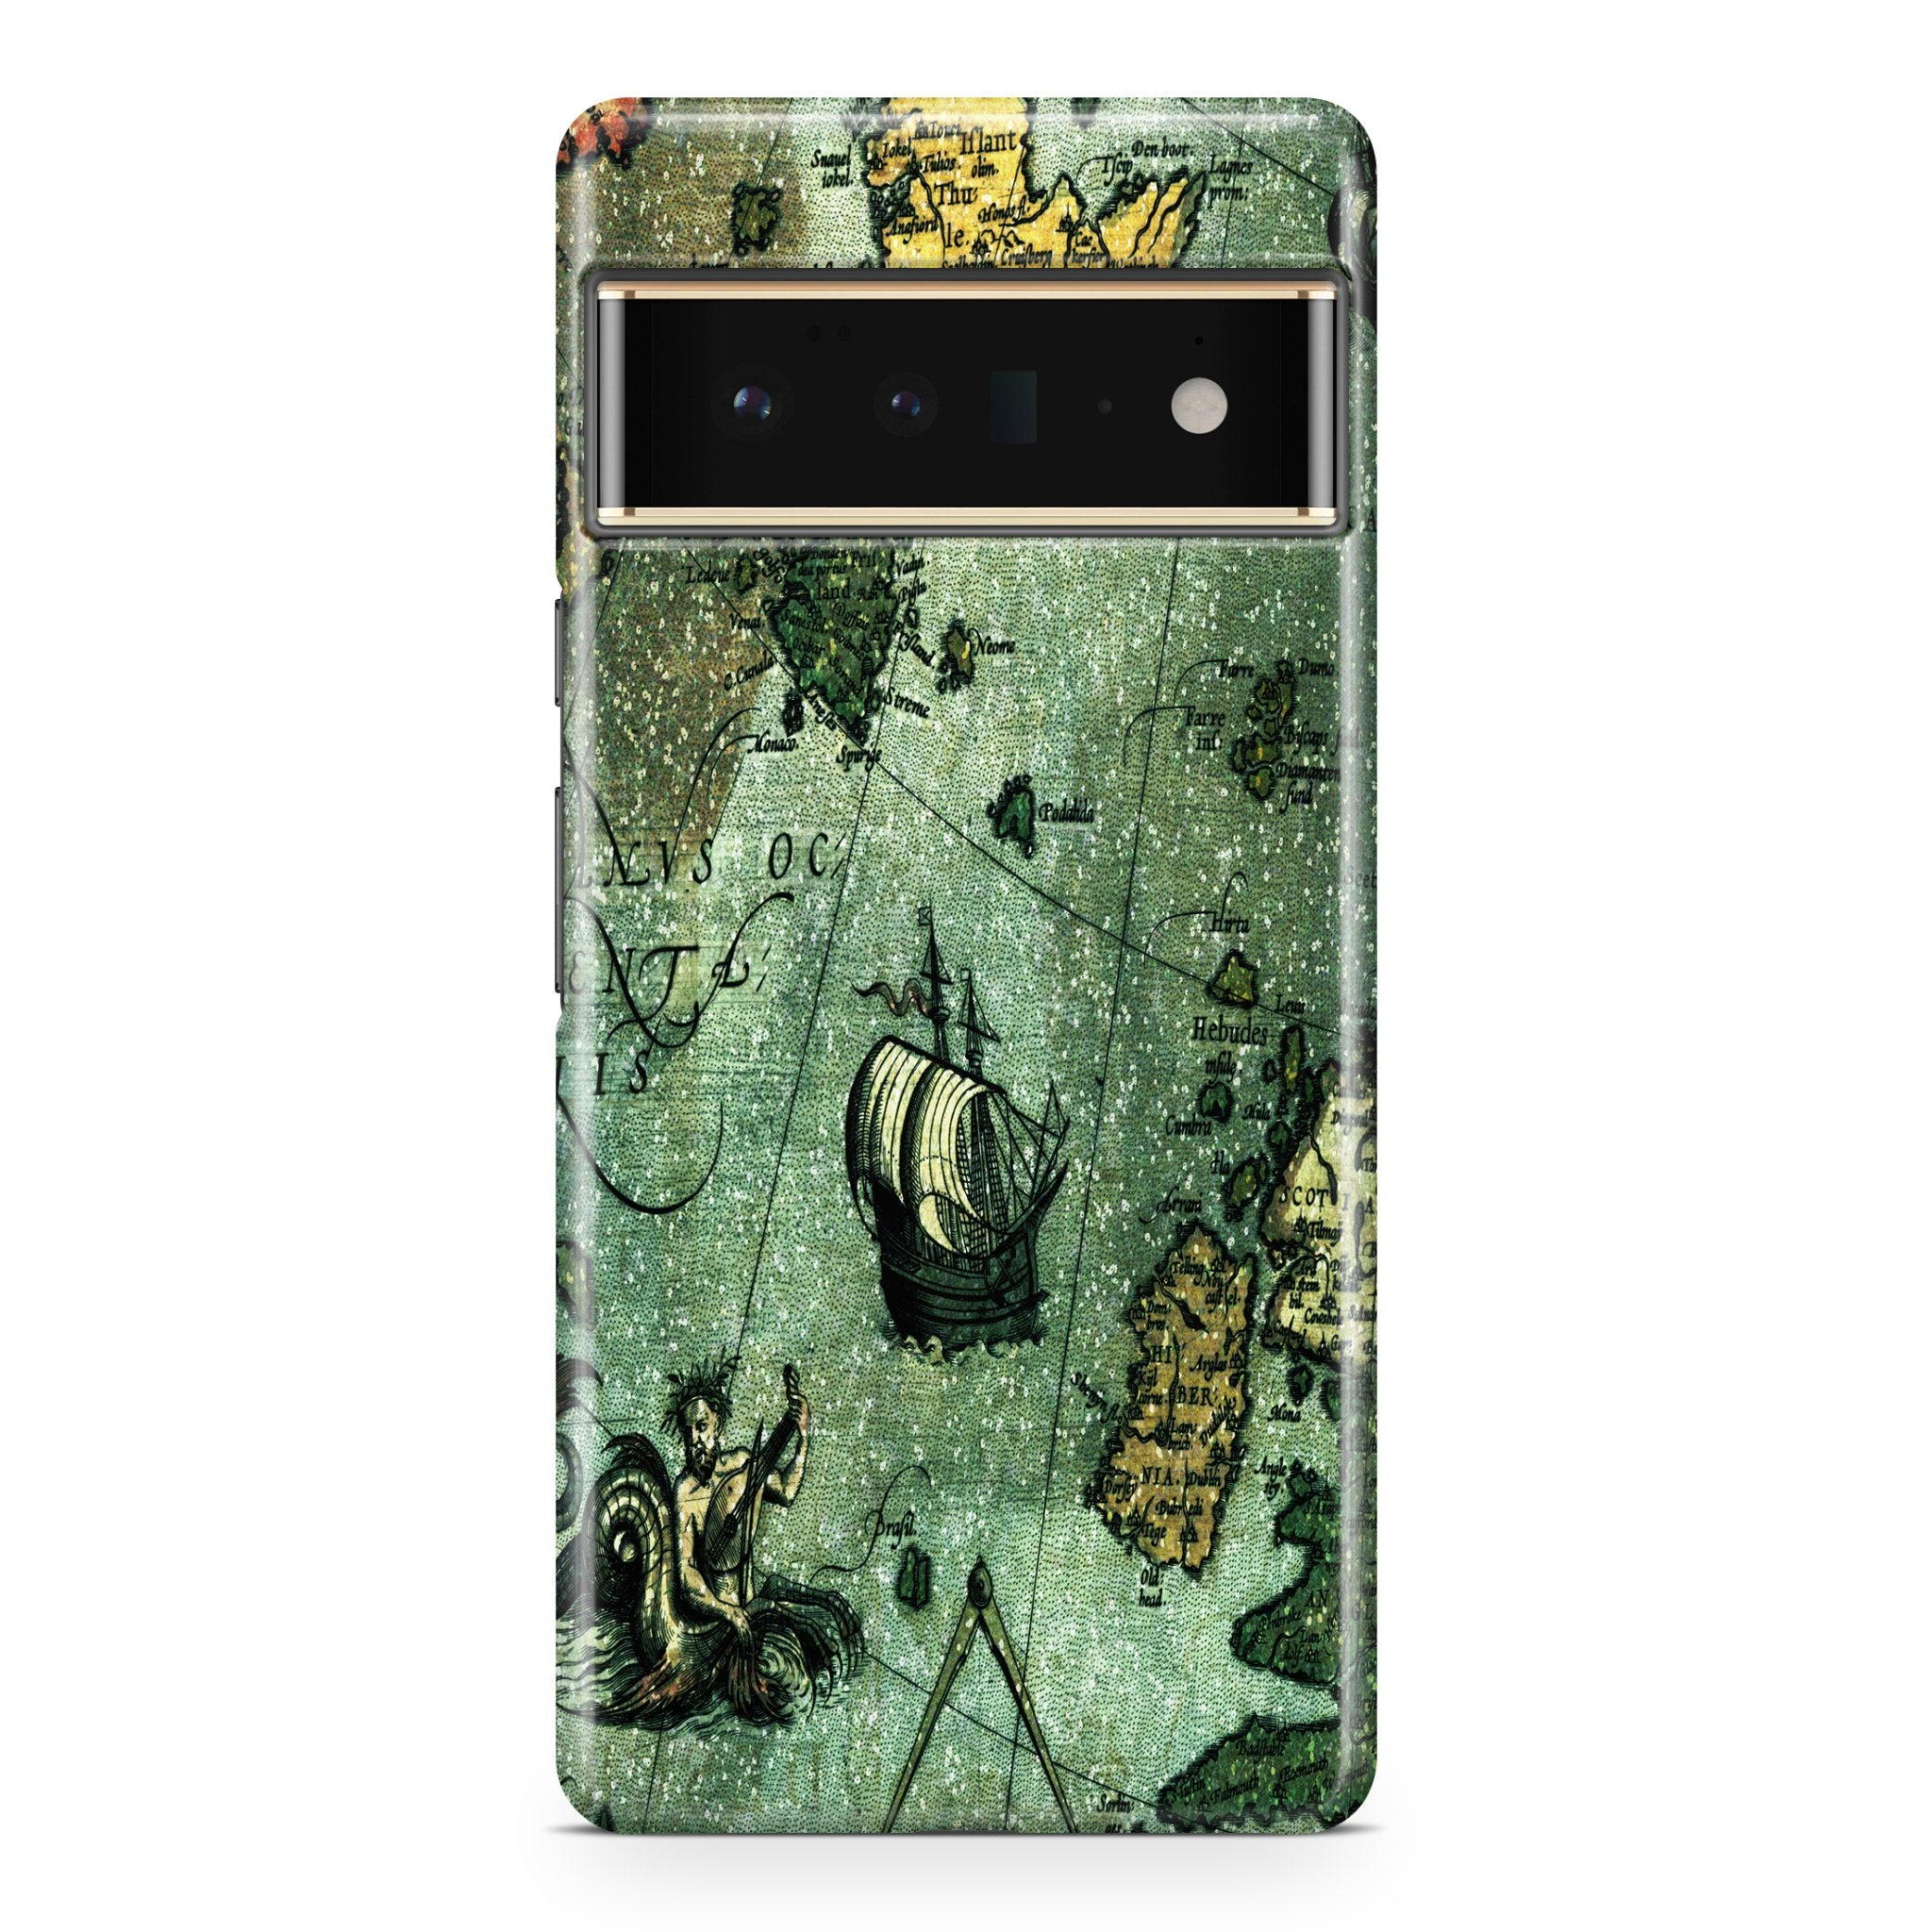 Ancient Water - Google phone case designs by CaseSwagger